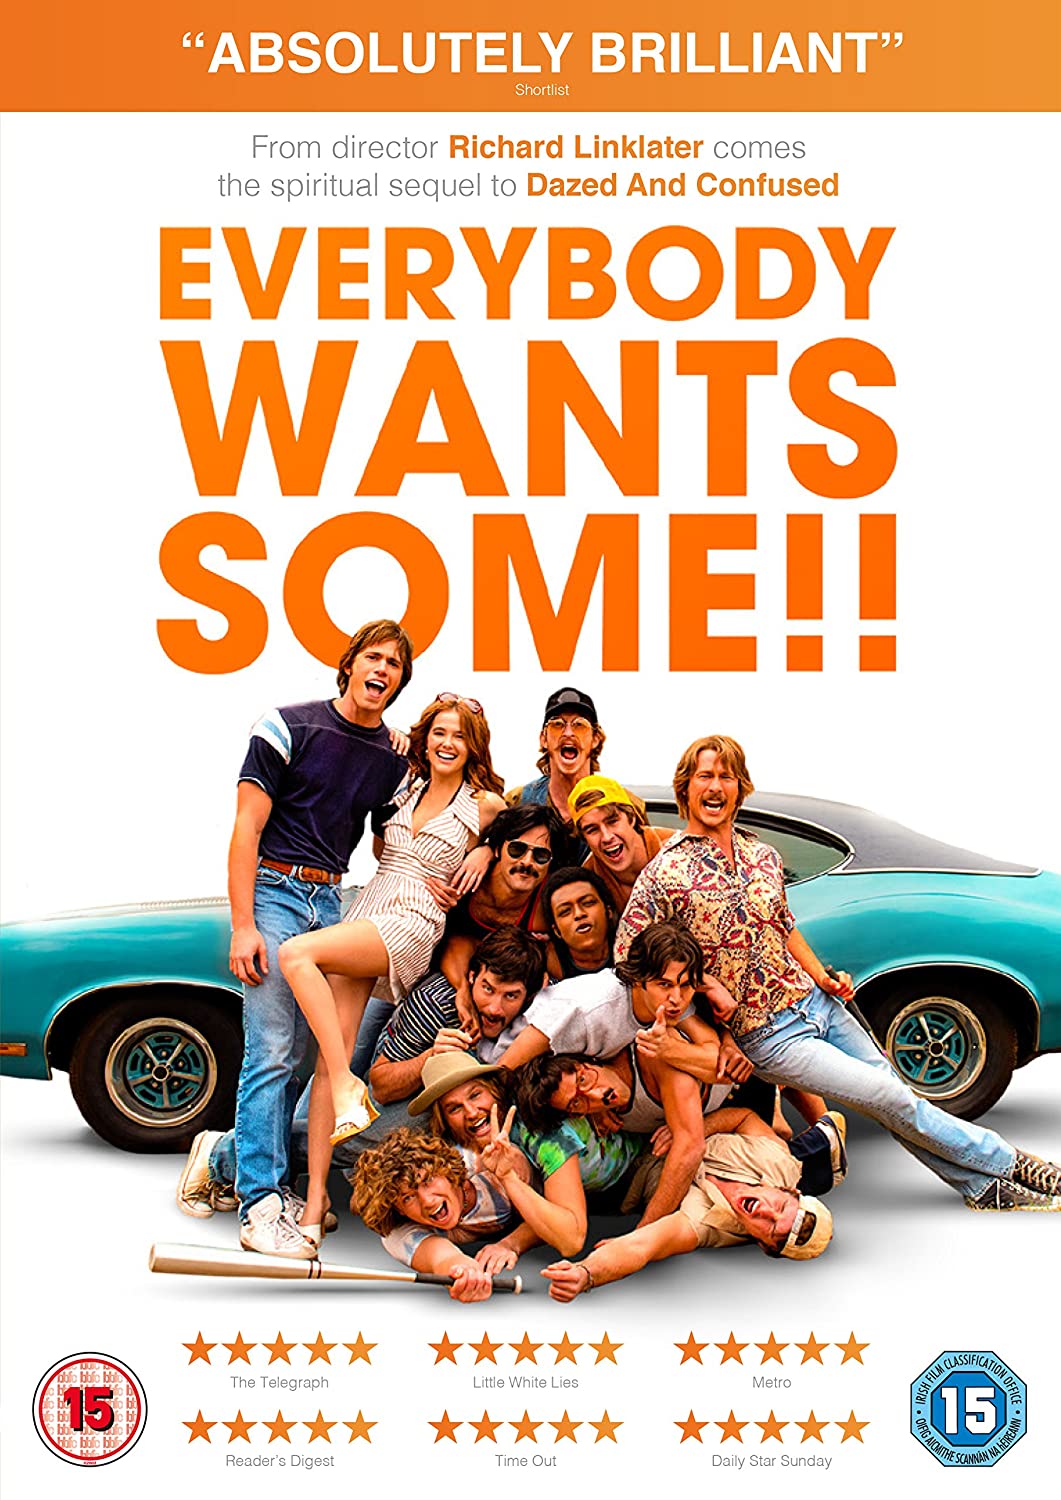 Everybody Wants Some!! [2016] - Comedy/Drama [DVD]